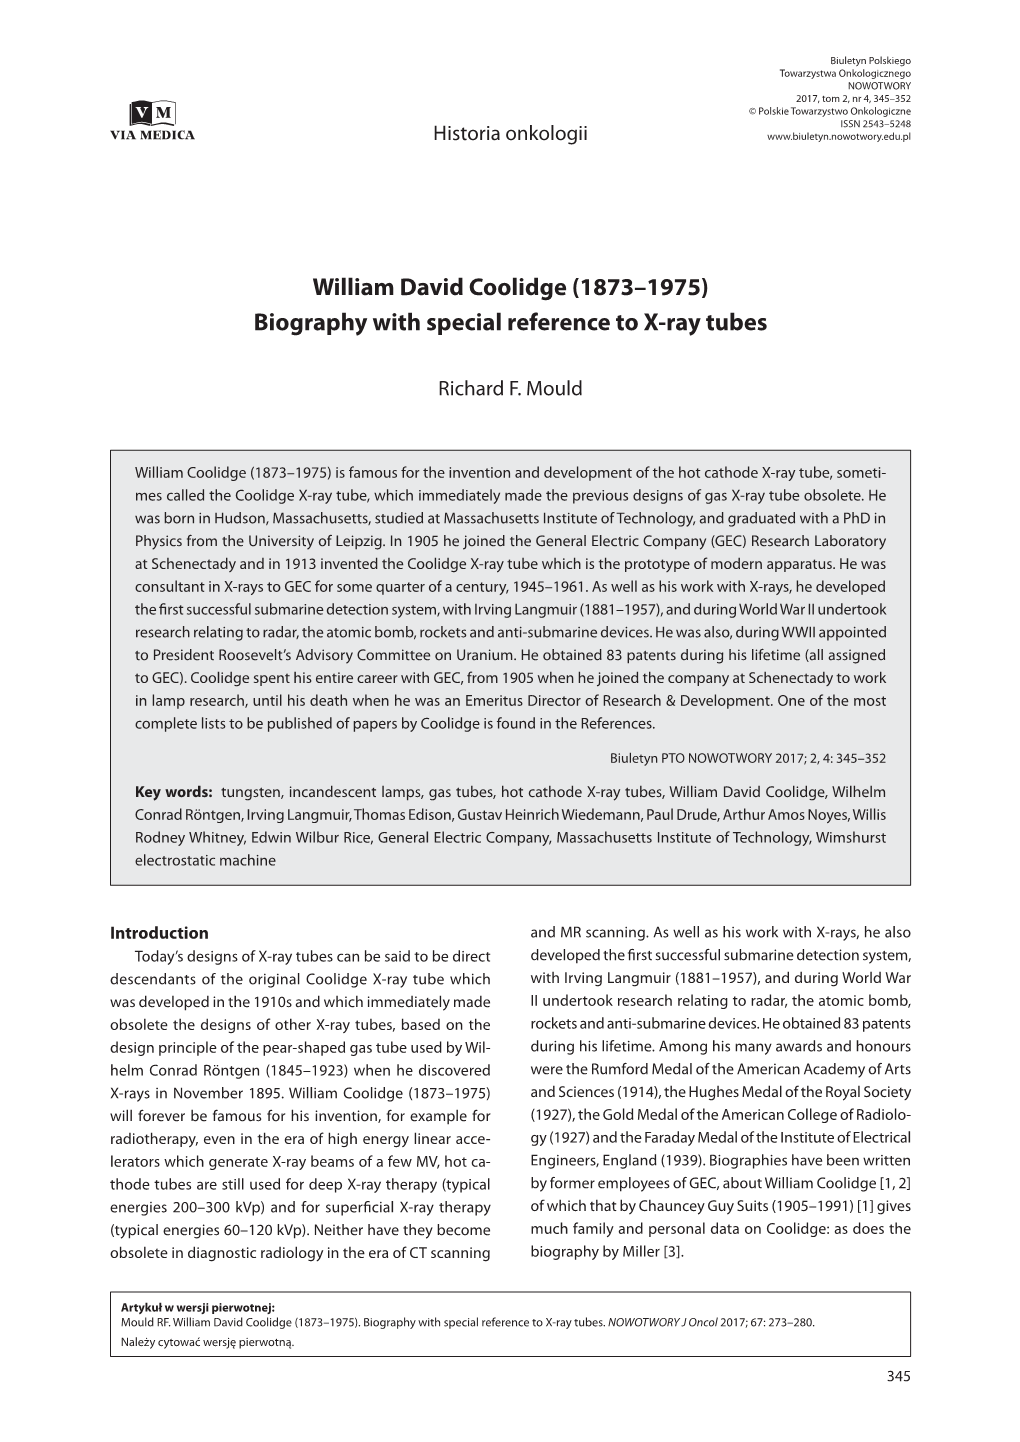 William David Coolidge (1873–1975) Biography with Special Reference to X-Ray Tubes